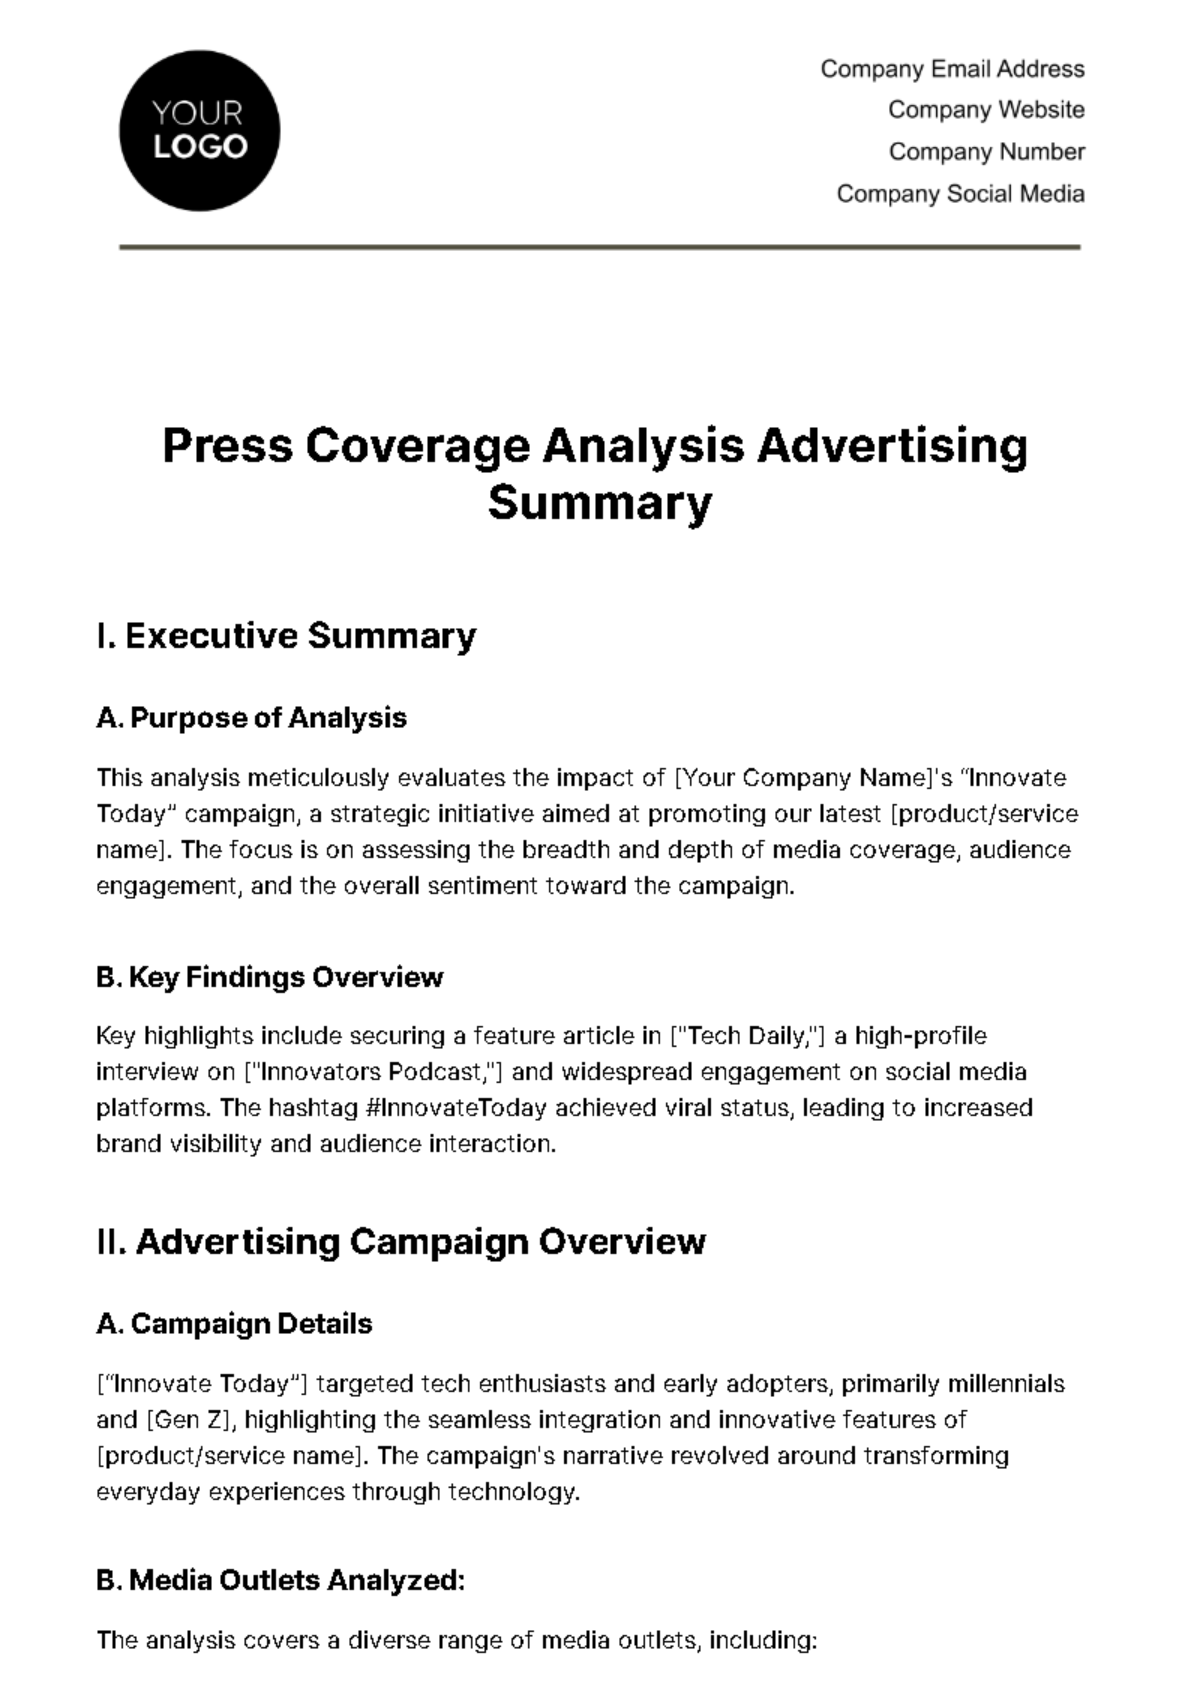 Free Press Coverage Analysis Advertising Summary Template